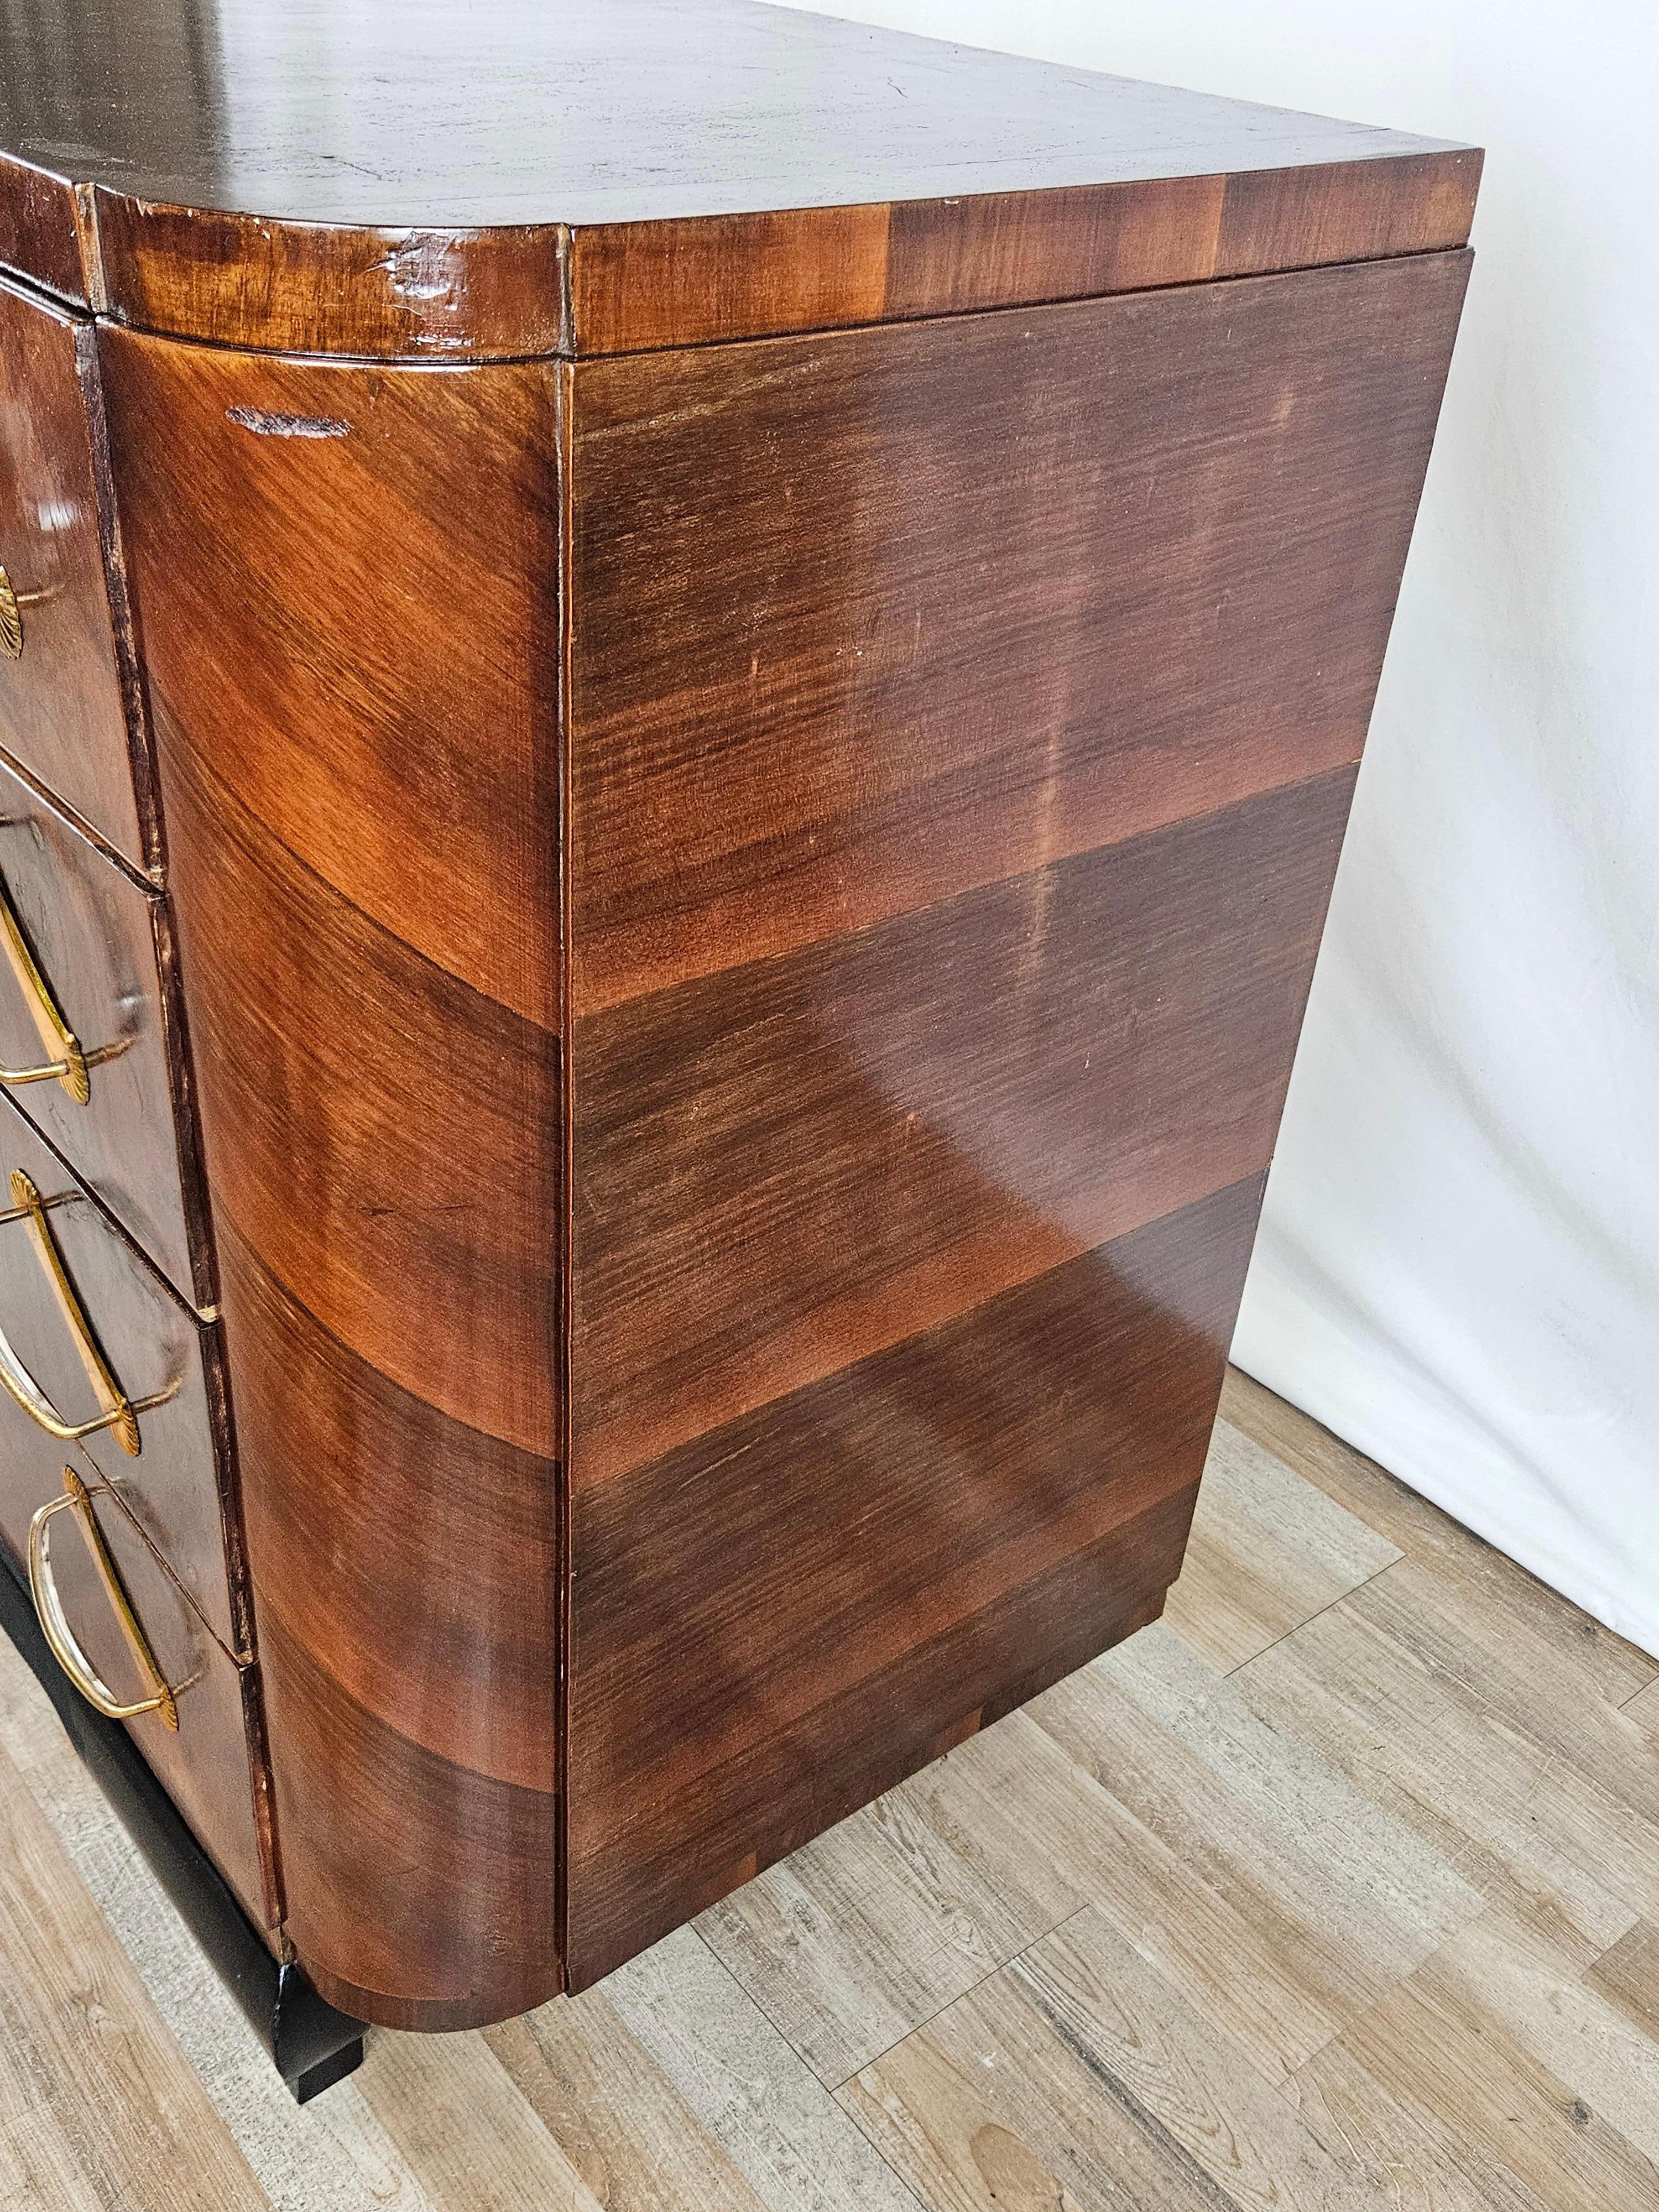 Art Deco walnut burl dresser with lacquered drawers and feet 20th century In Good Condition For Sale In Premariacco, IT